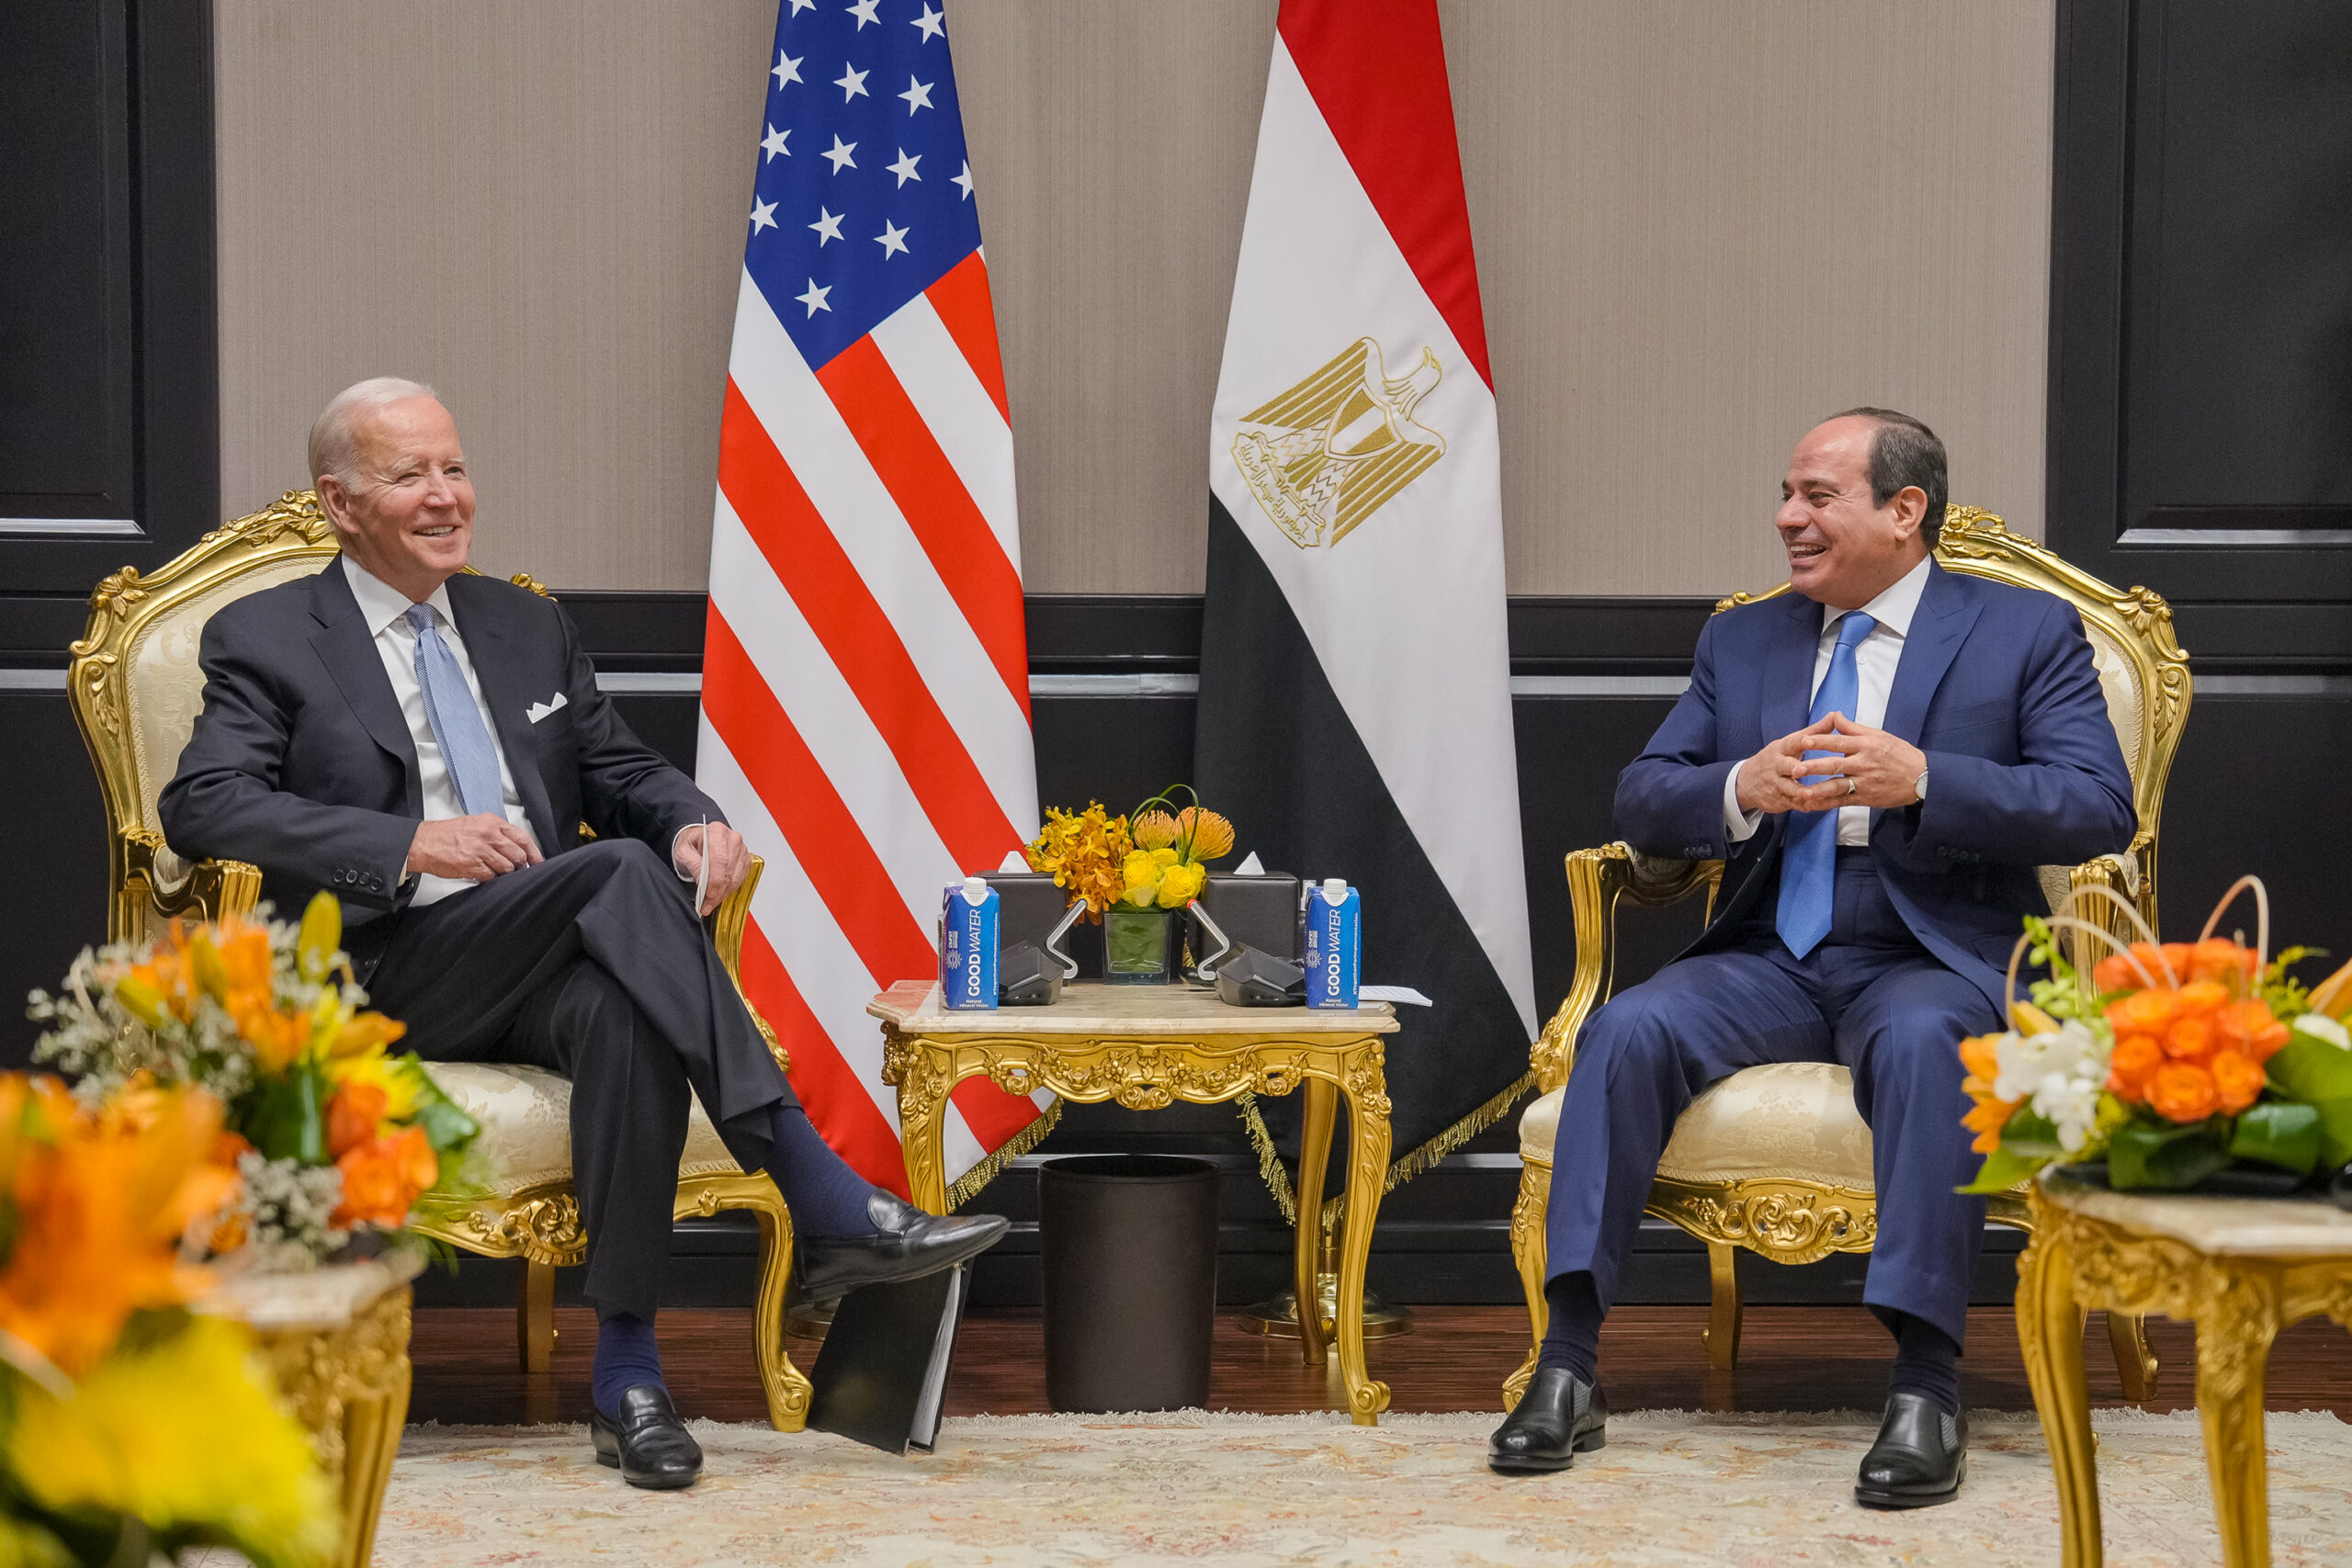 President Joe Biden participates in a bilateral meeting with Egyptian President Abdel Fattah el-Sisi, Friday, November 11, 2022, at the Tonino Lamborghini International Convention Center in Sharm el-Sheikh, Egypt. (Official White House Photo by Adam Schultz)